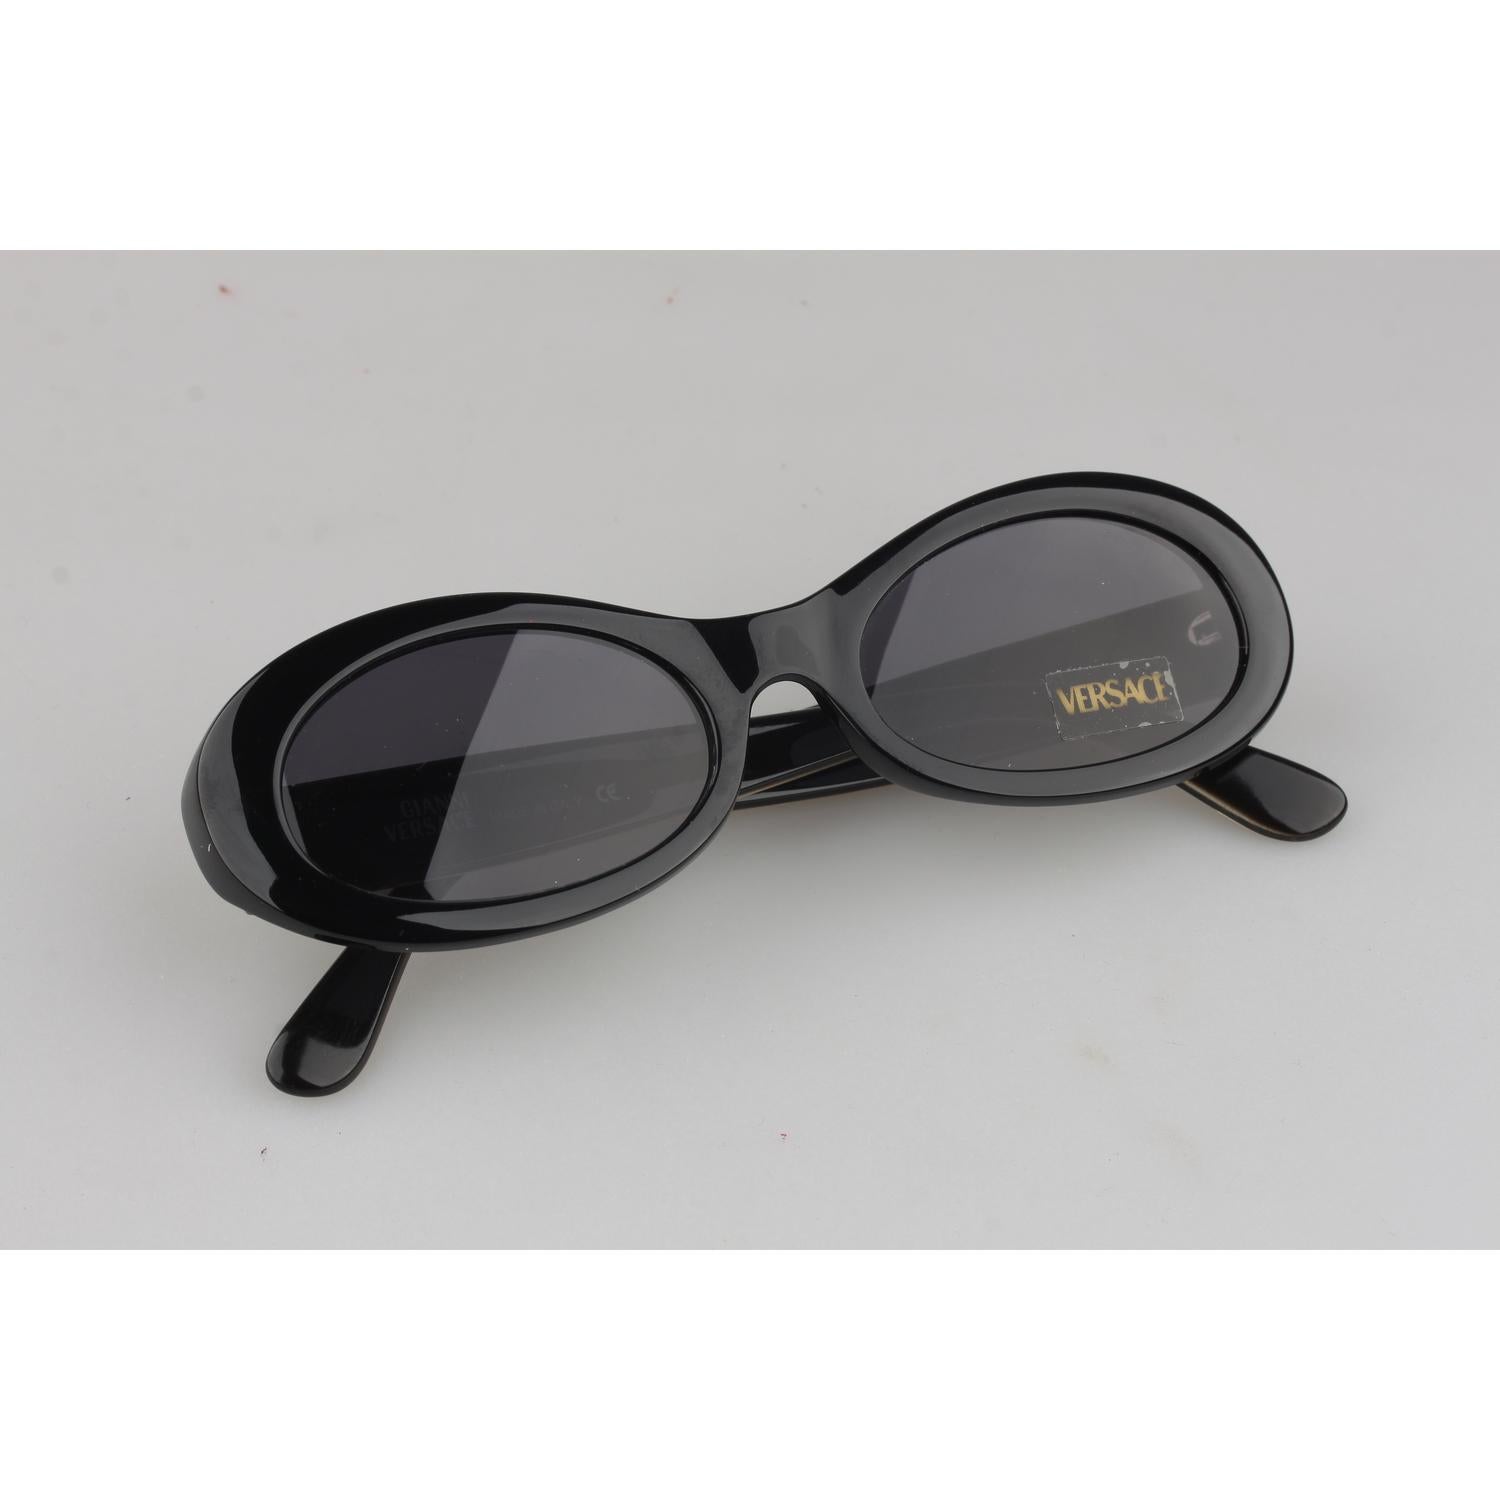 Black, Oval retro shaped vintage sunglasses by Gianni Versace. From the 1980s, Black acetate frame, Versace Medusa silverlogos on the sides. Gianni Versace 100% Total UVA UVB protection original lenses (sticker / label attached). Model refs: Mod.